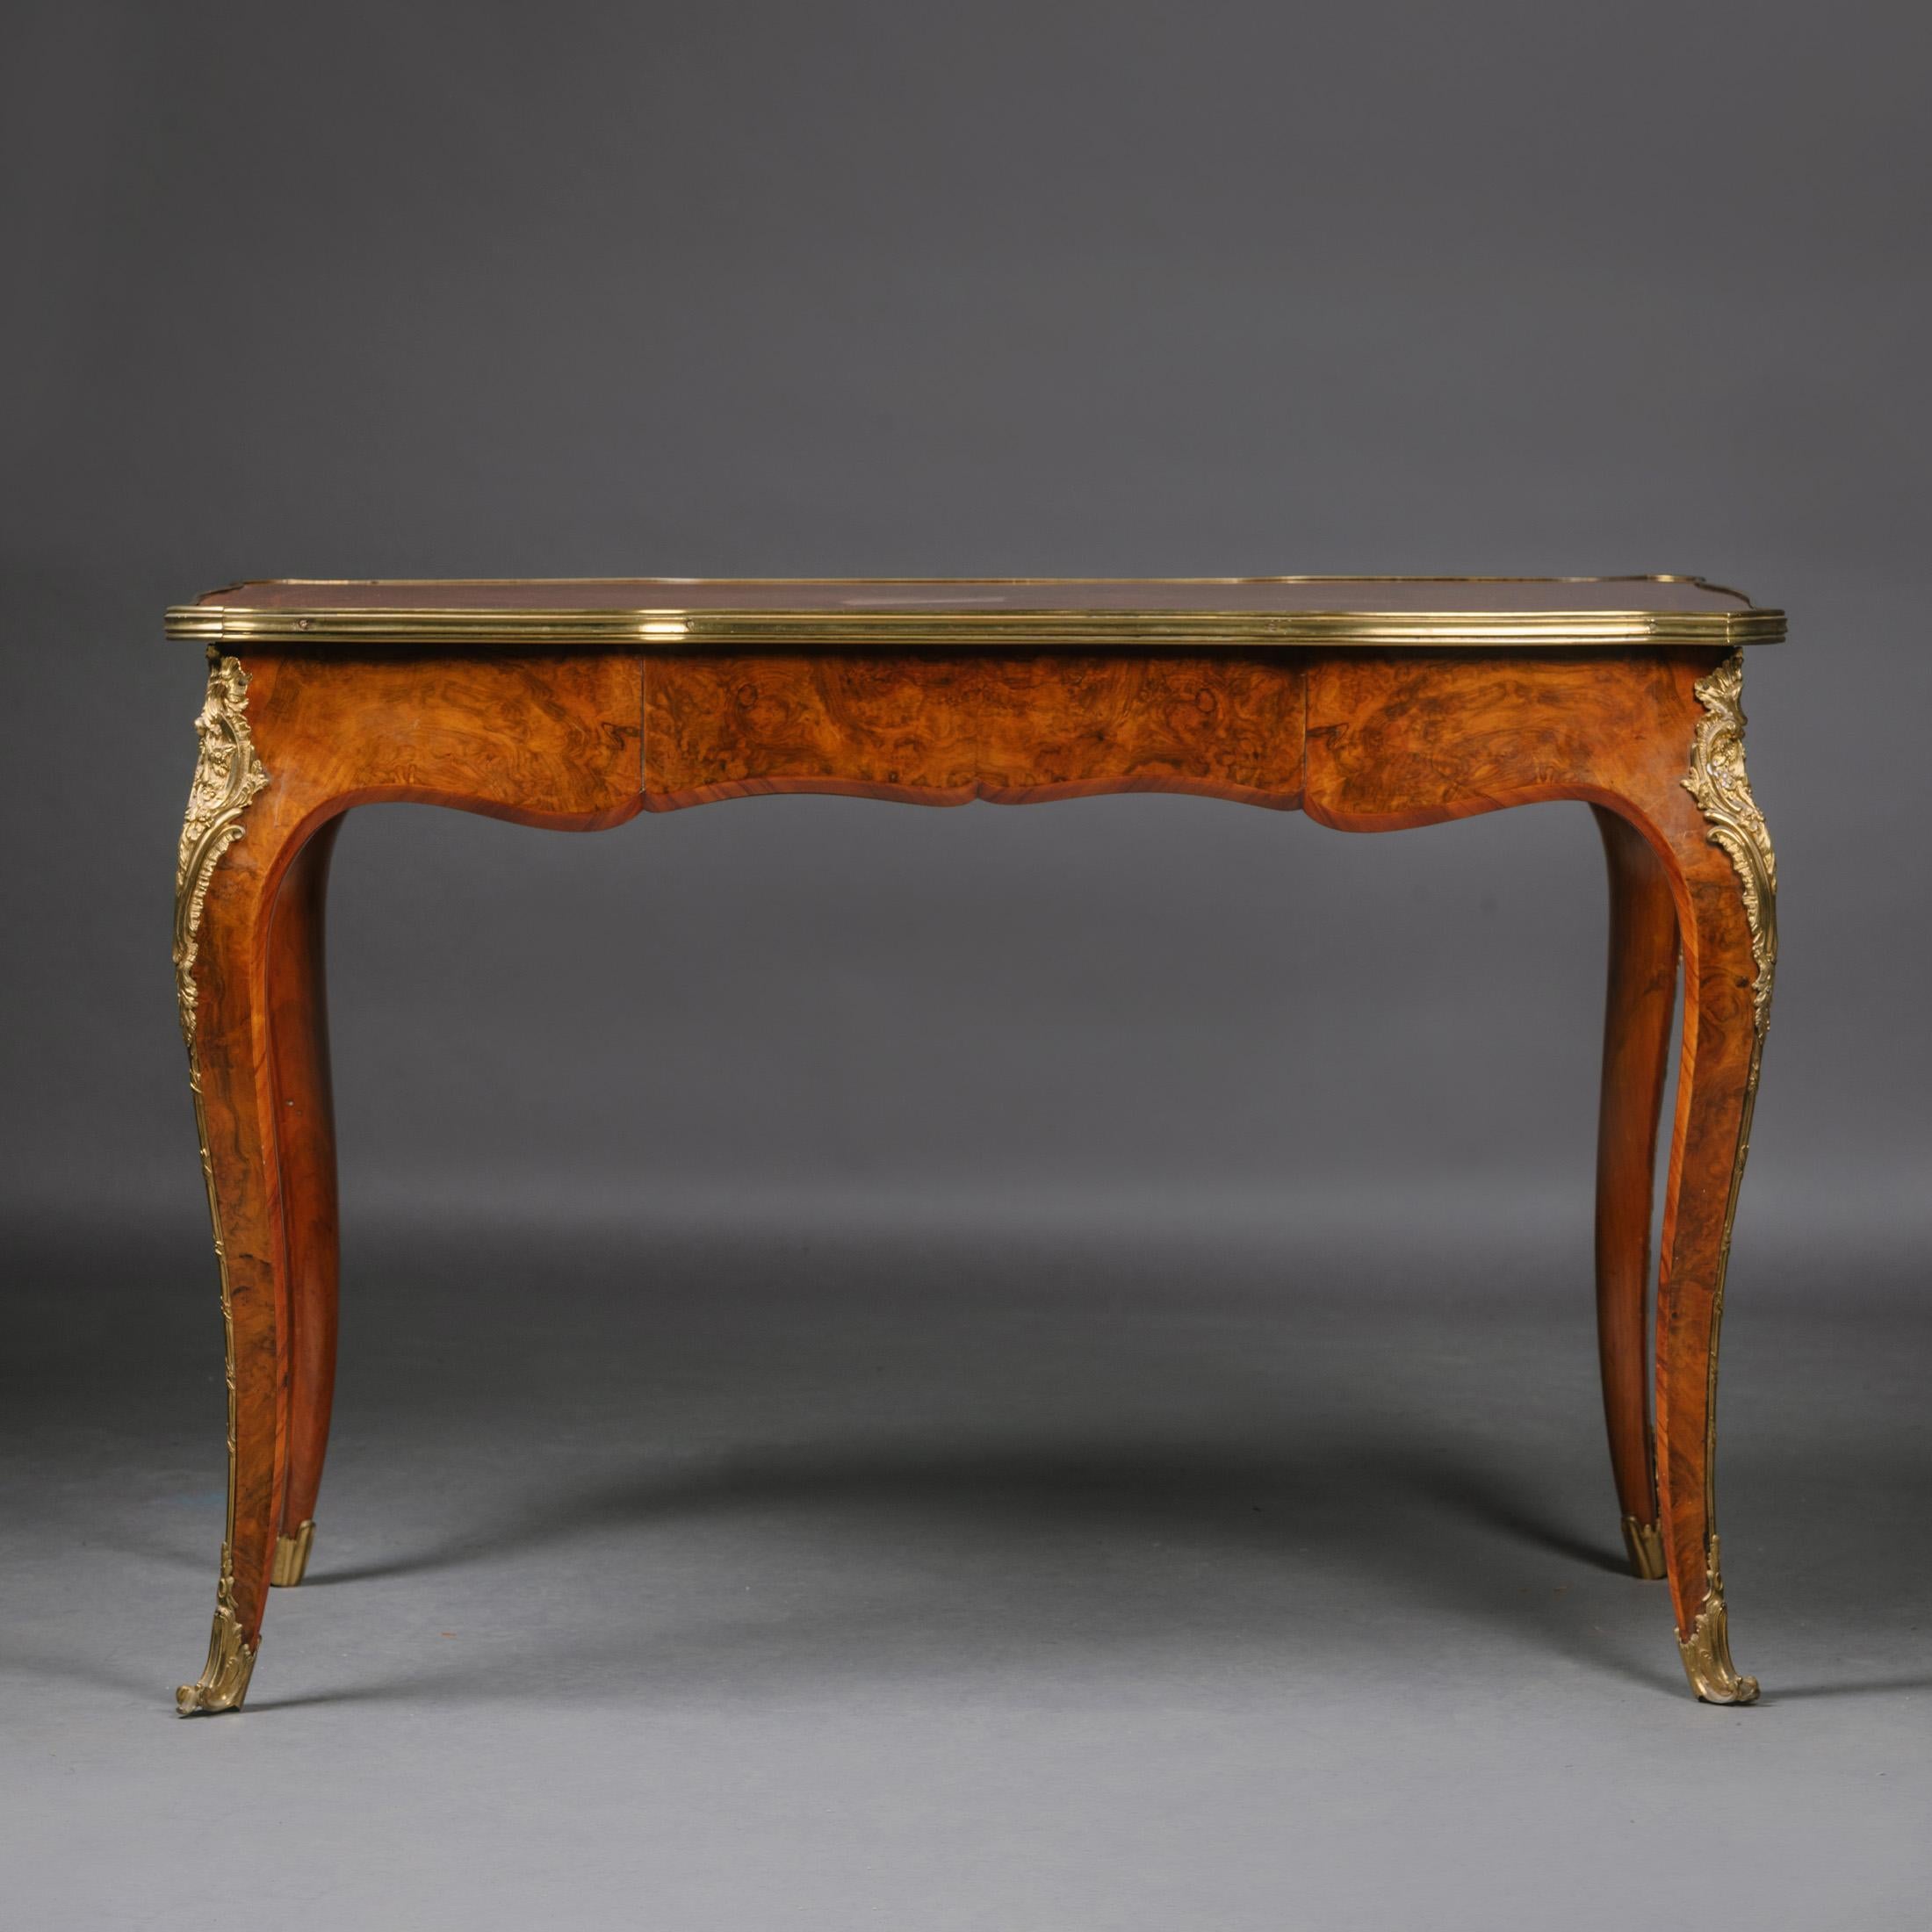 A Gilt-Bronze Mounted Burr Walnut Writing Table, Probably by Gillows. 

The rectangular top has a gilt-bronze surround above a serpentine frieze fronted by a central drawer. The corners have foliate claps above cabriole legs.

England, circa 1850.